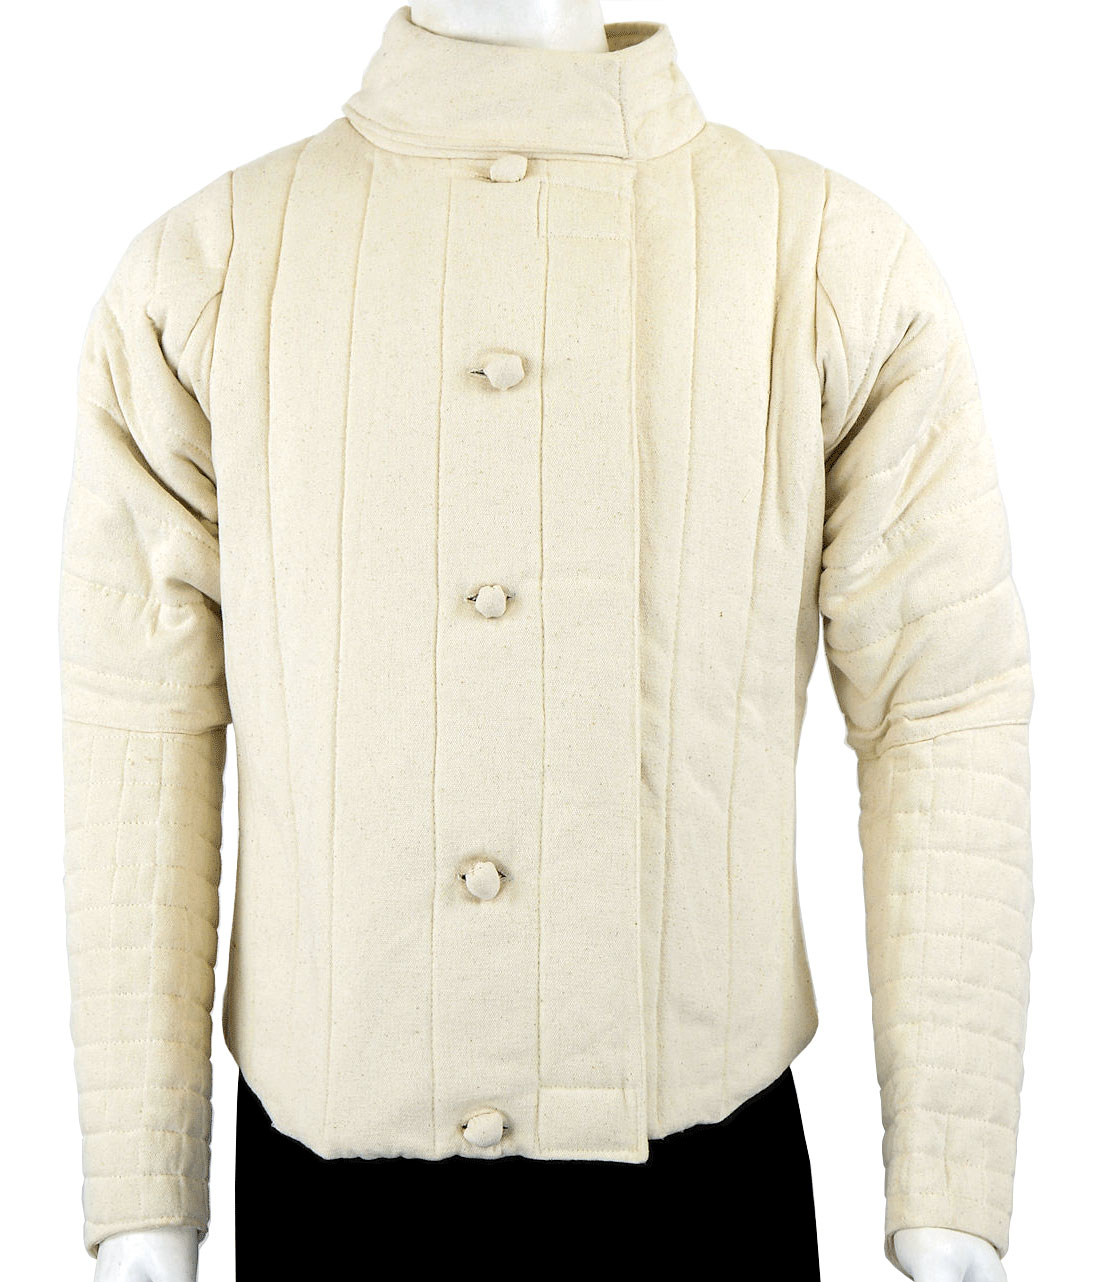 Fencing Jacket, Size S